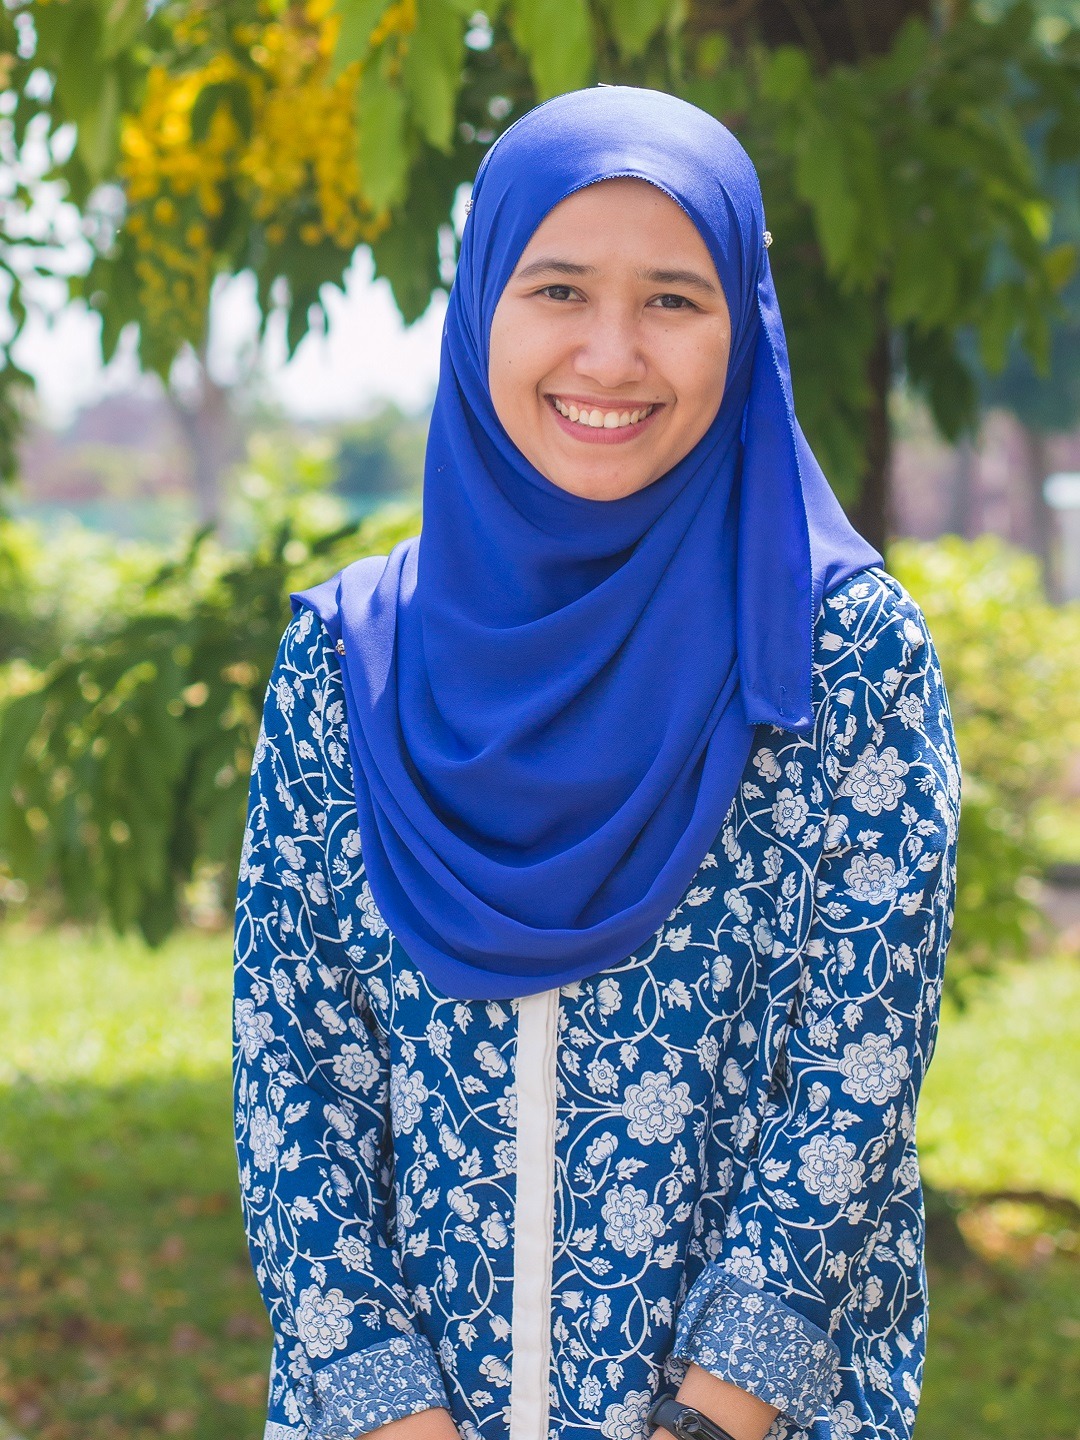 “I’m very fond of Curtin Malaysia because of its beautiful environment. Imagine working in a place with all the sounds of nature but still connected to modernity though strong wi-fi (lucky me!). As a nature lover, it has been my dream workplace for...